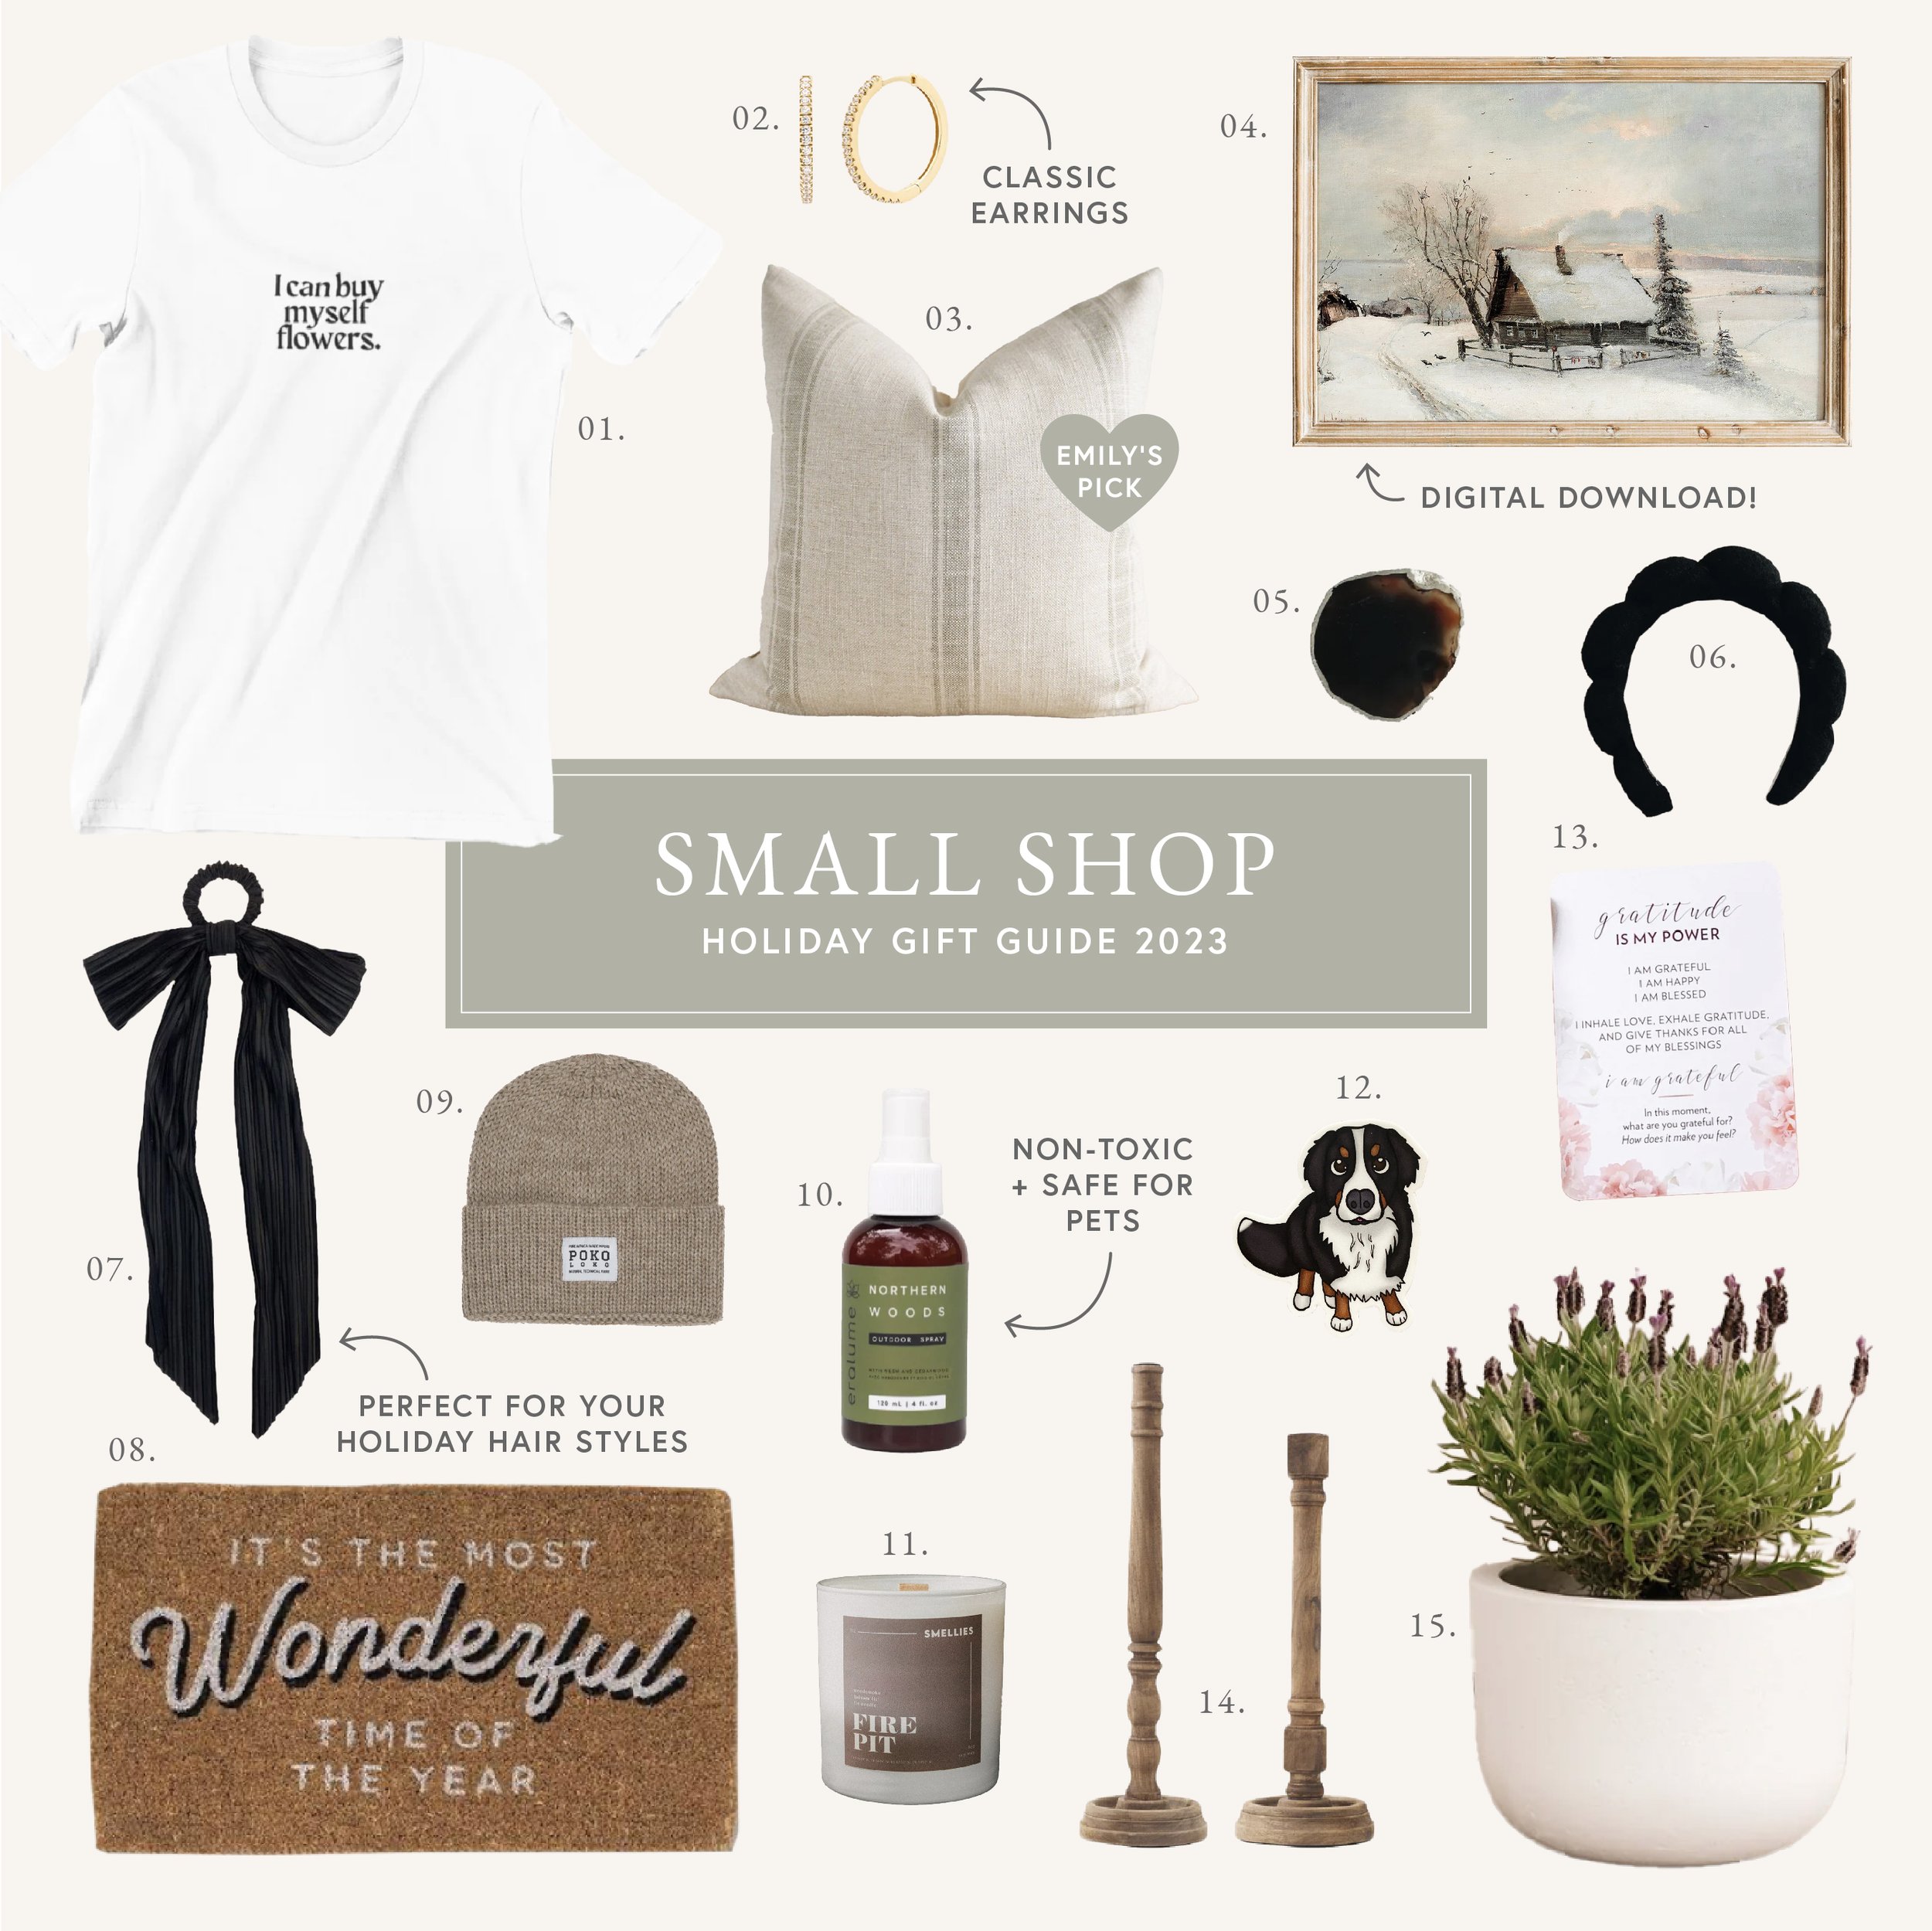 Canadian Small Shop Holiday Gift Guide — Emily Lavinskas